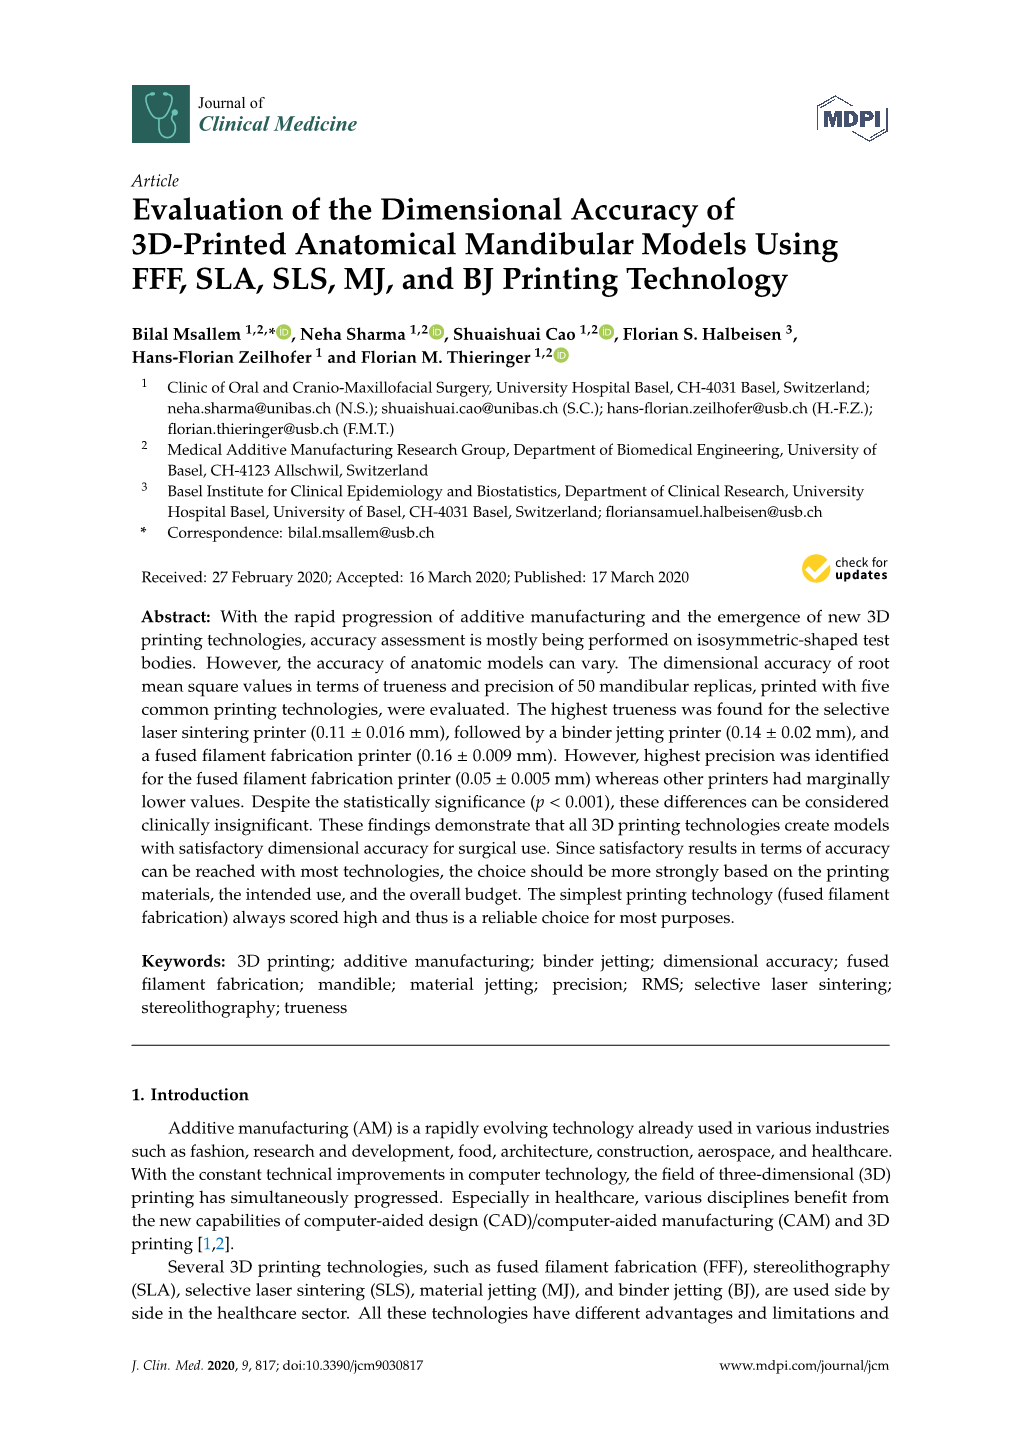 Evaluation of the Dimensional Accuracy of 3D-Printed Anatomical Mandibular Models Using FFF, SLA, SLS, MJ, and BJ Printing Technology